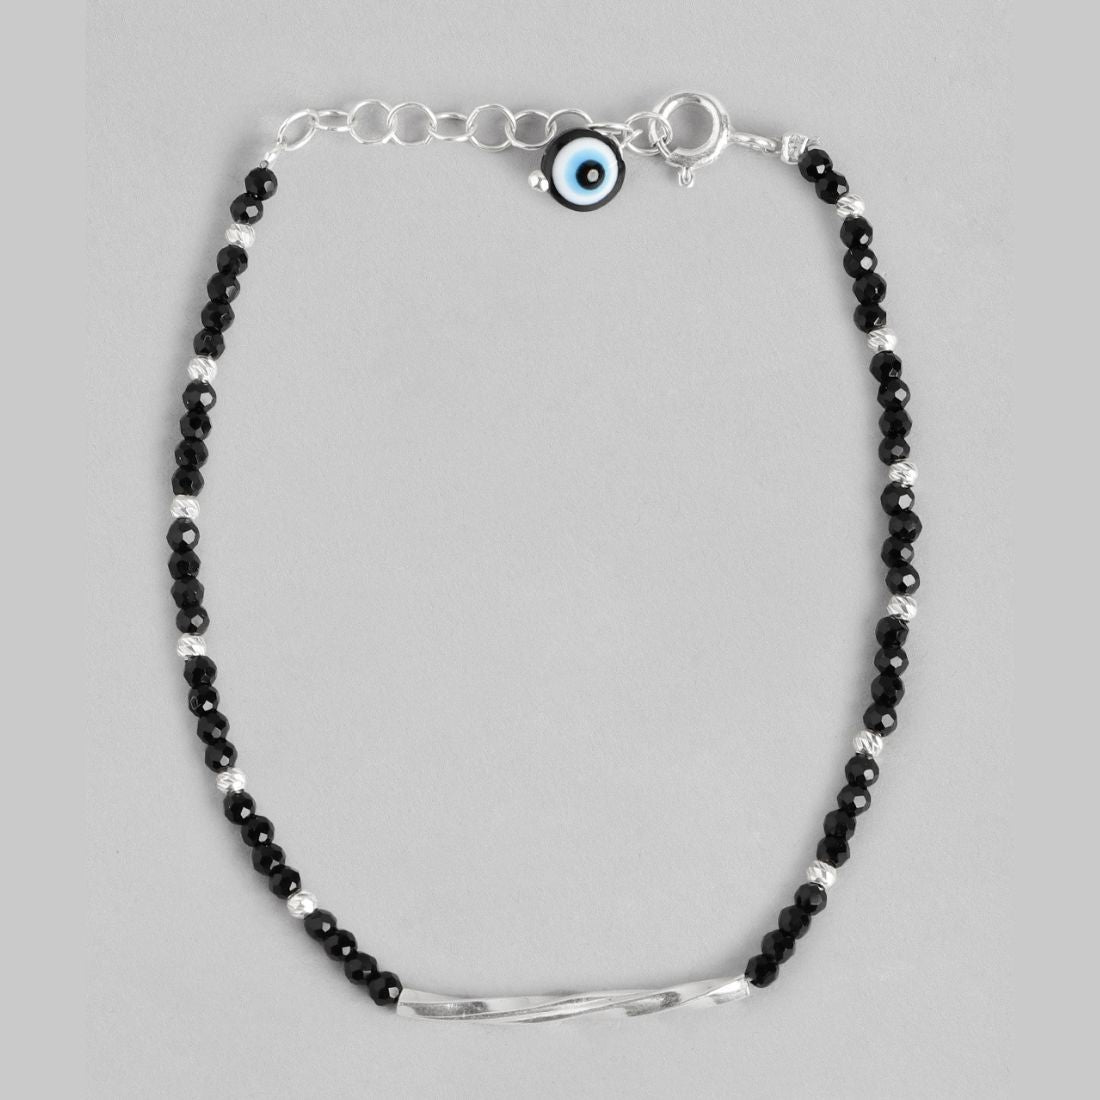 Evil Eye Charms 925 Sterling Silver Rhodium-Plated Bracelet with Beads